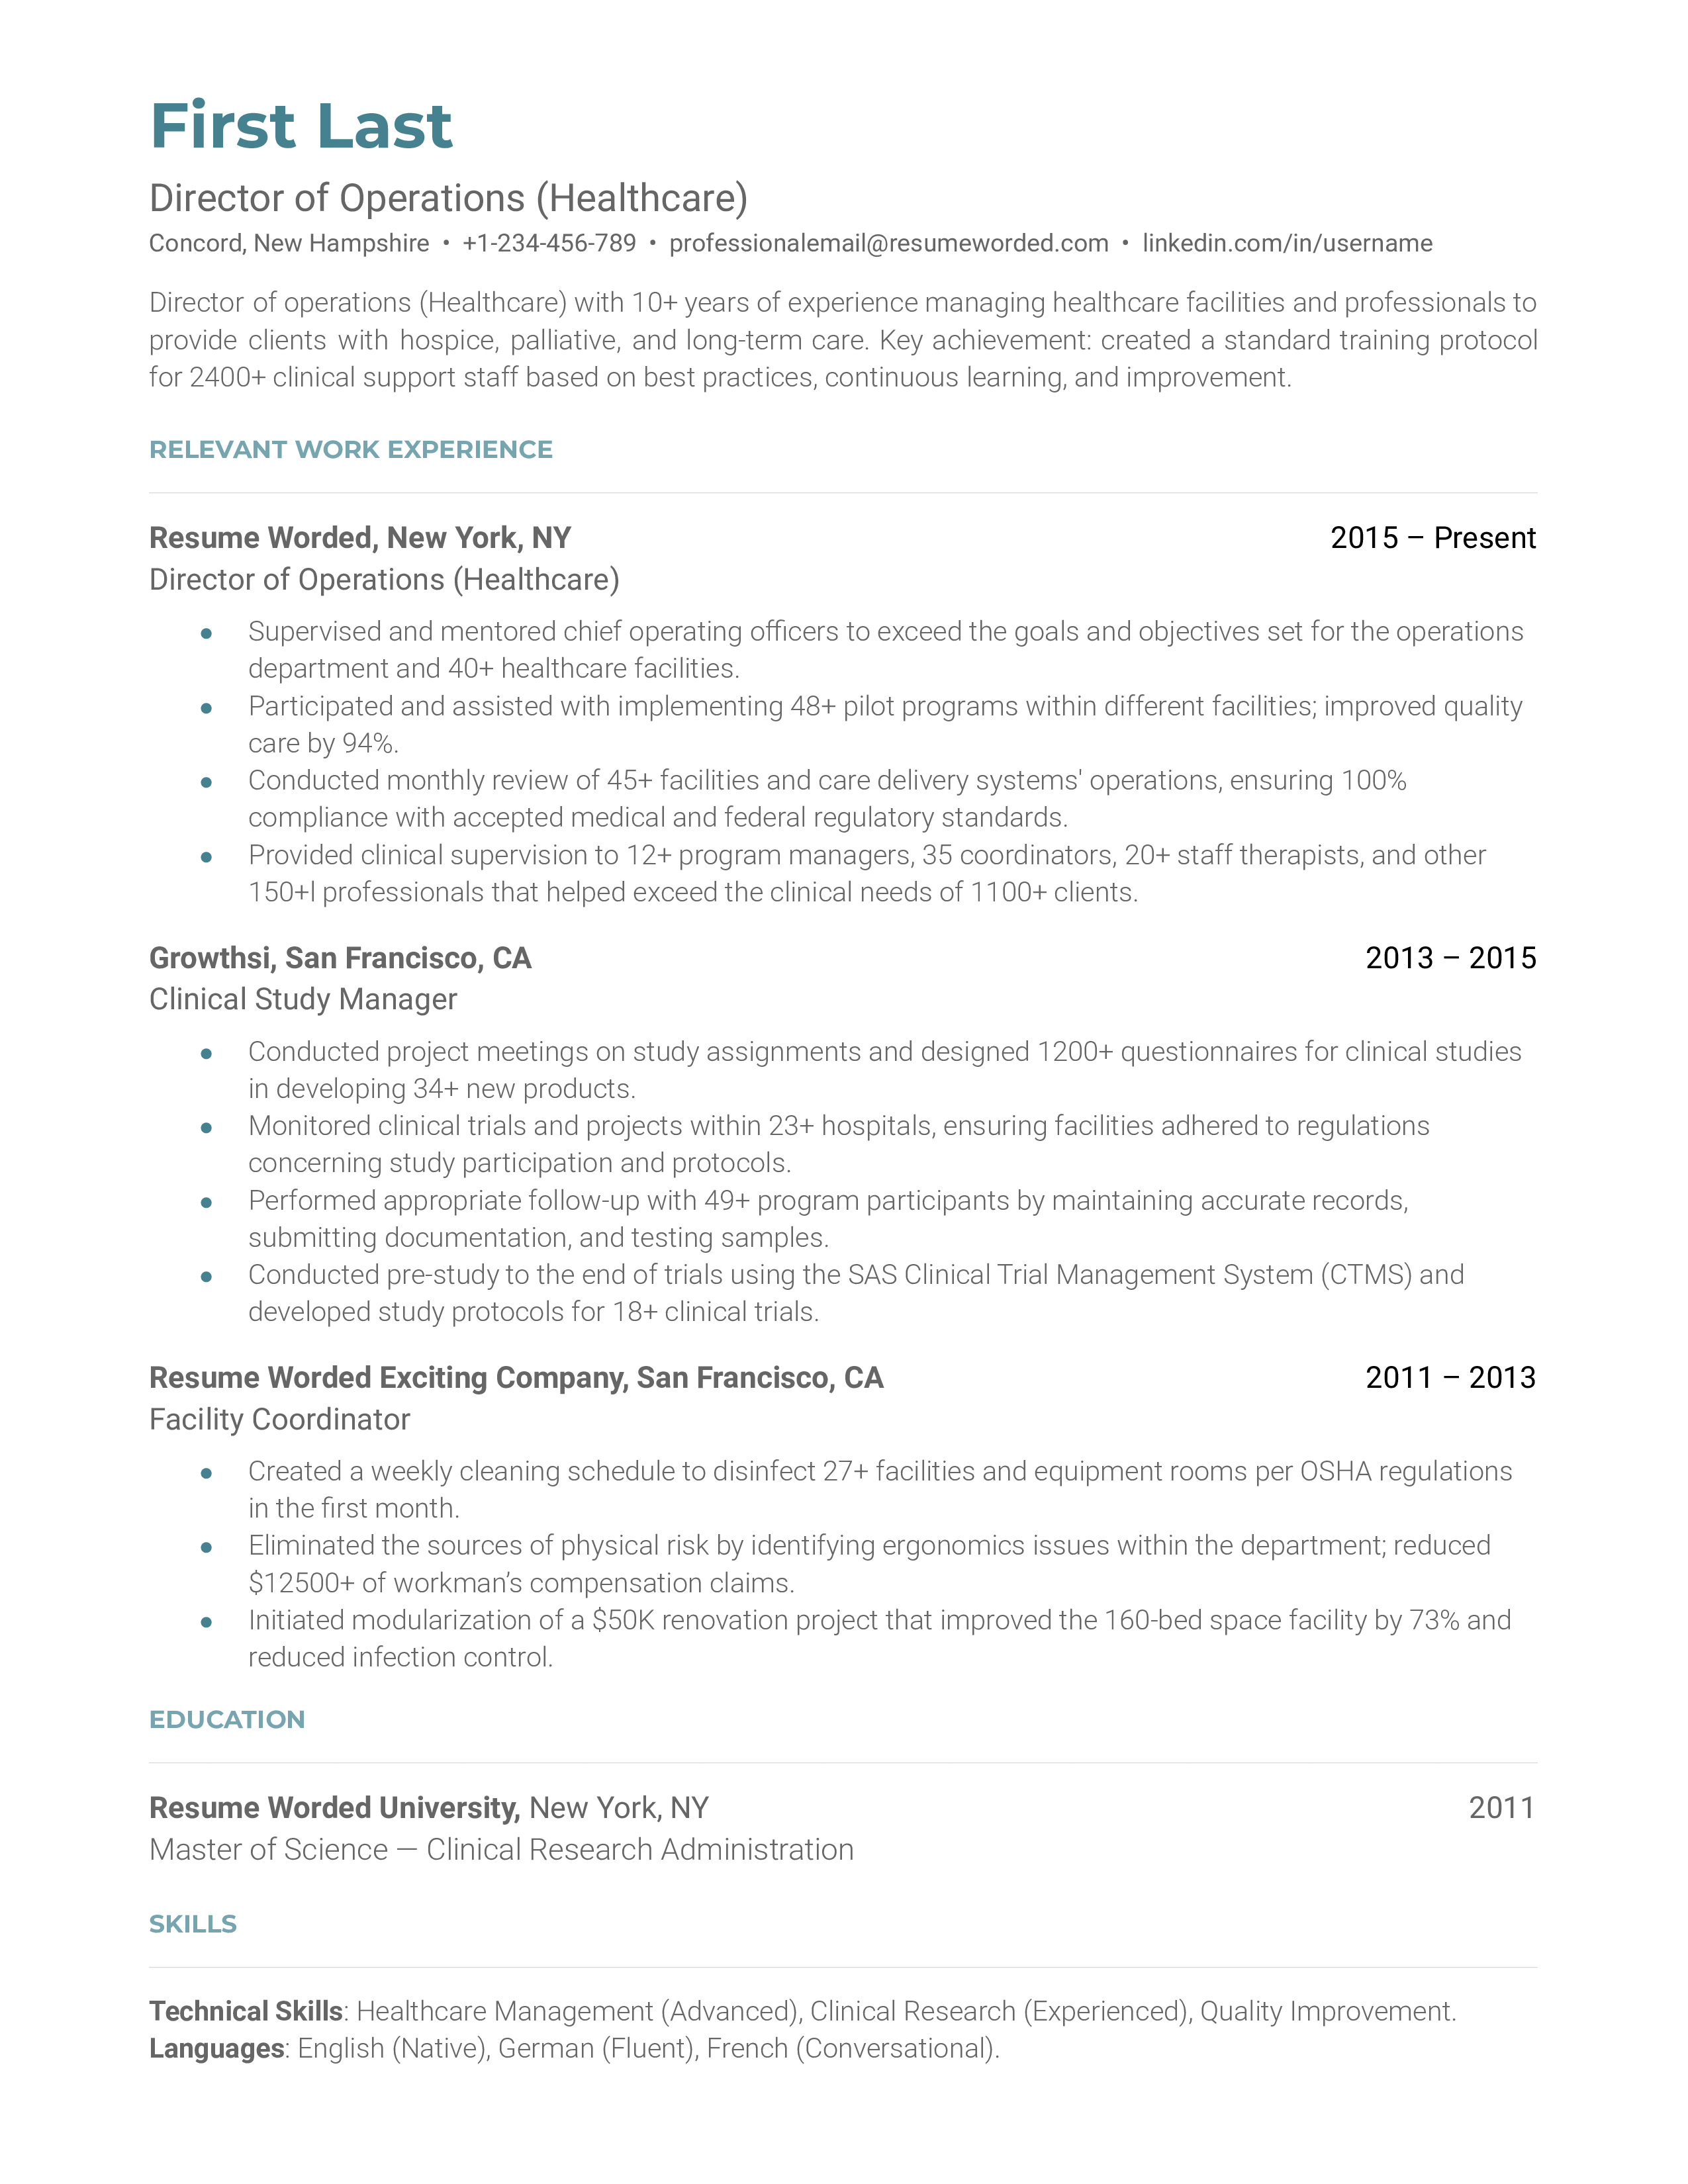 Director of Operations (Healthcare) Resume Sample